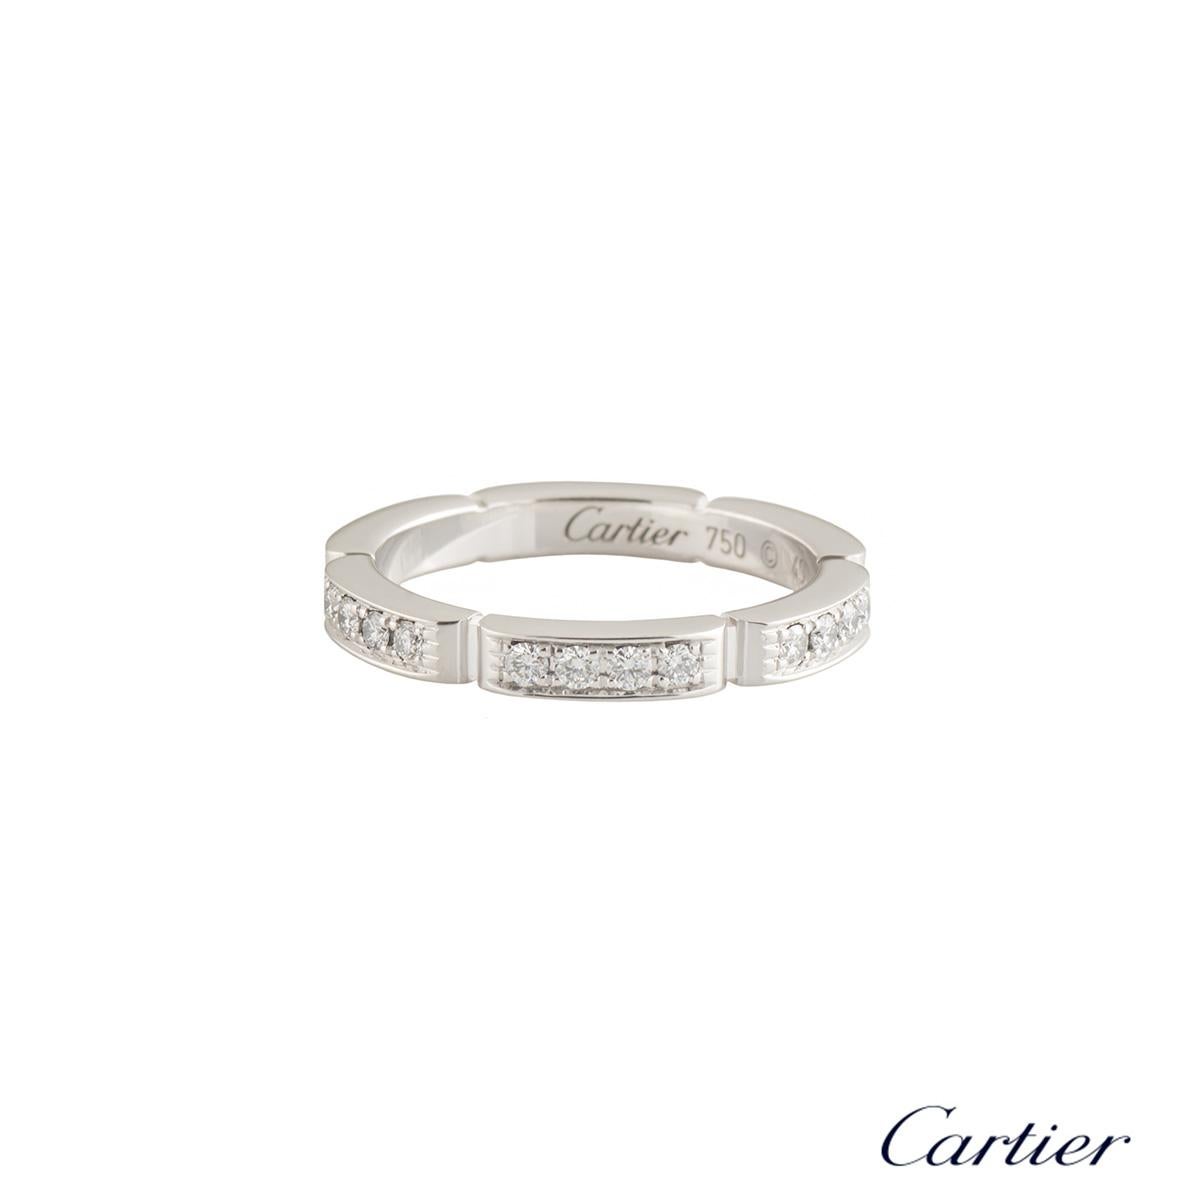 A beautiful 18k white gold diamond Cartier Maillon Panthere ring from the Links and Chain collection. The ring comprises of 6 brick work design panels with each panel pave set with 4 round brilliant cut diamonds totalling approximately 0.35ct, F